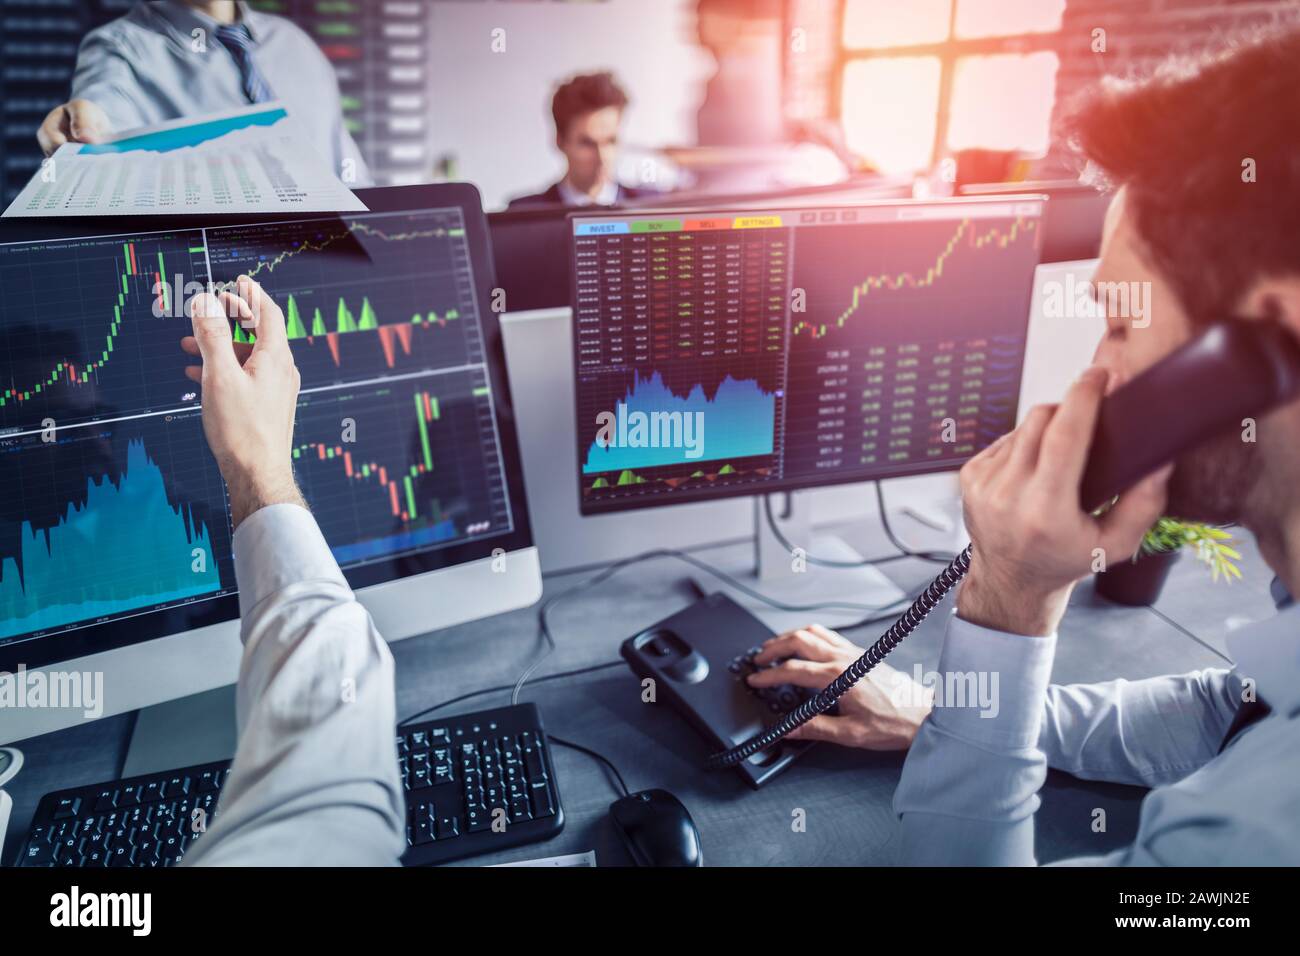 Business team investment trading do this deal on a stock exchange. People working in the office. Stock Photo